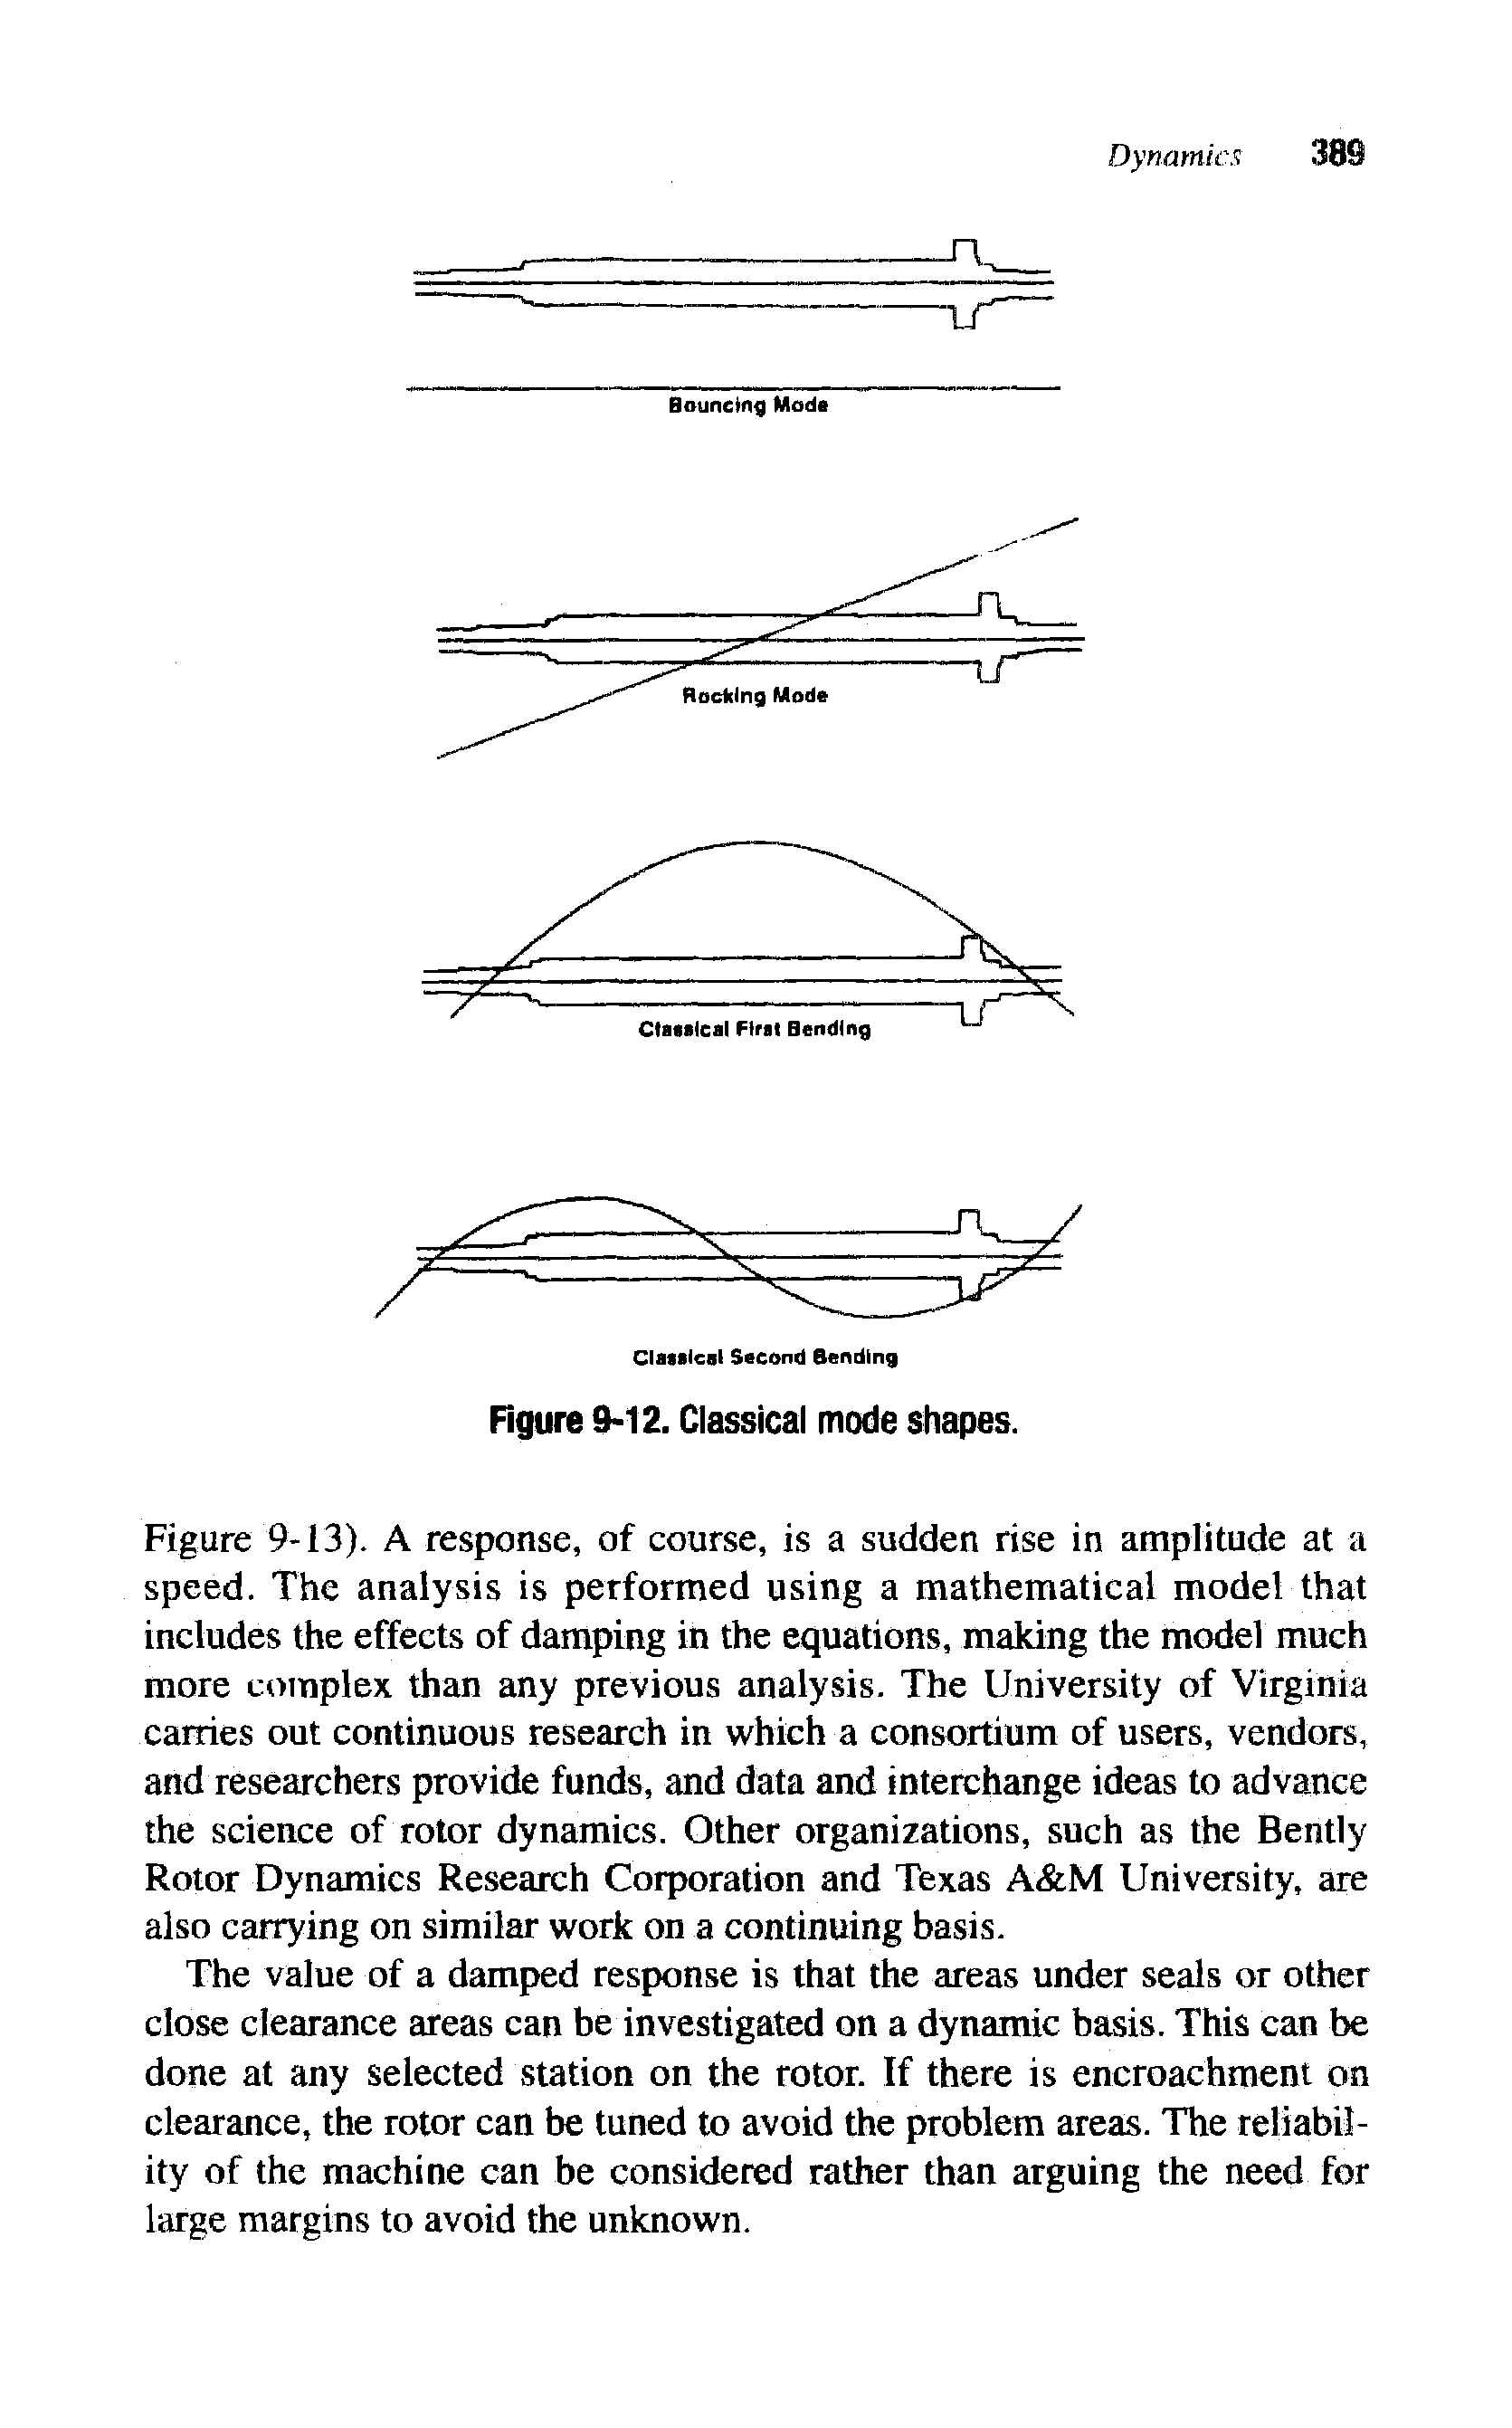 Figure 9-13). A response, of course, is a sudden rise in amplitude at a speed. The analysis is performed using a mathematical model that includes the effects of damping in the equations, making the model much more complex than any previous analysis. The University of Virginia carries out continuous research in which a consortium of users, vendors, and researchers provide funds, and data and interchange ideas to advance the science of rotor dynamics. Other organizations, such as the Bently Rotor Dynamics Research Corporation and Texas A M University, are also carrying on similar work on a continuing basis.